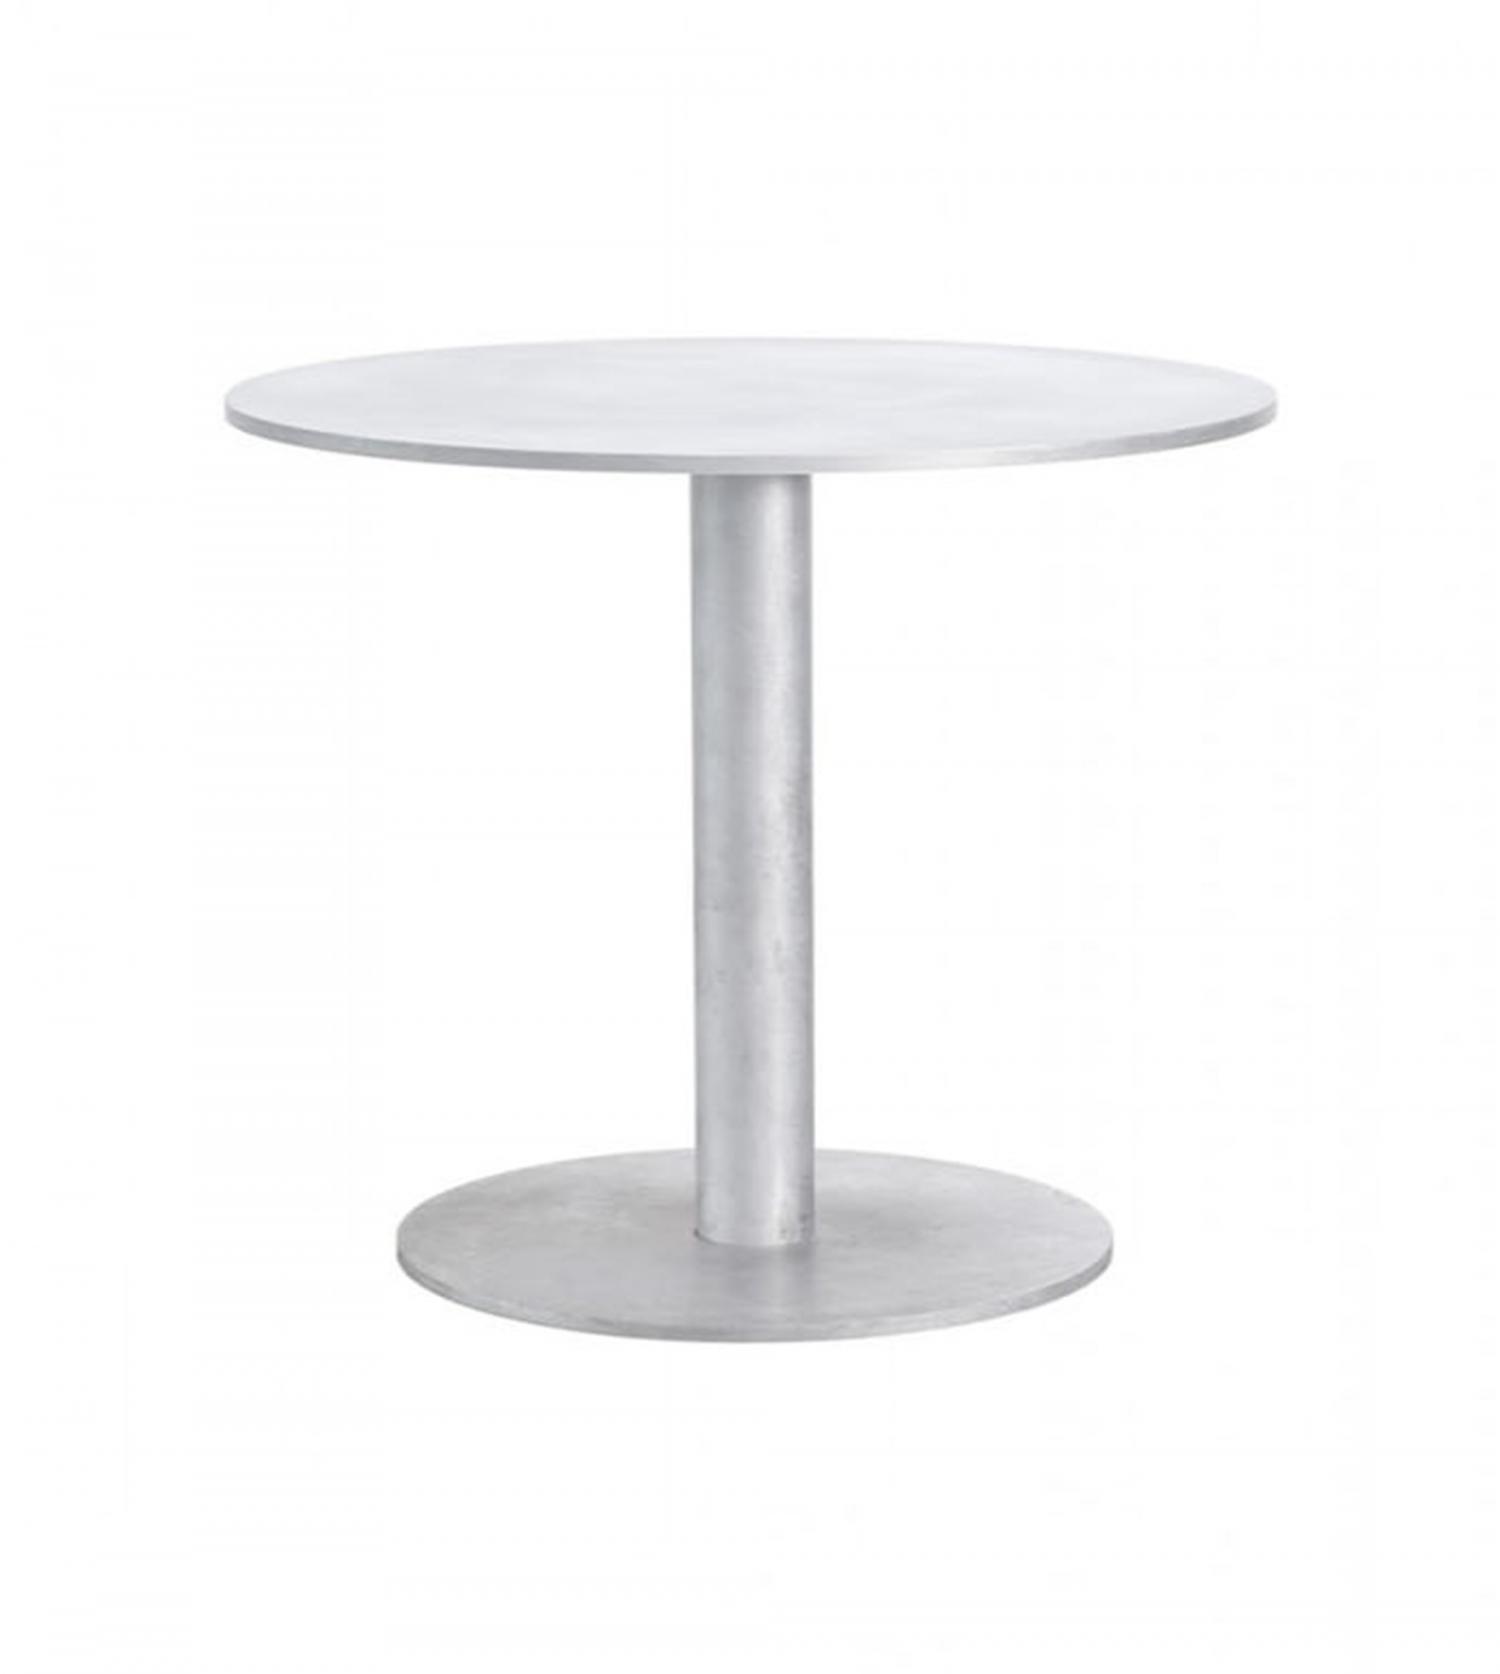 ROUND TABLE S - VALERIE OBJECTS